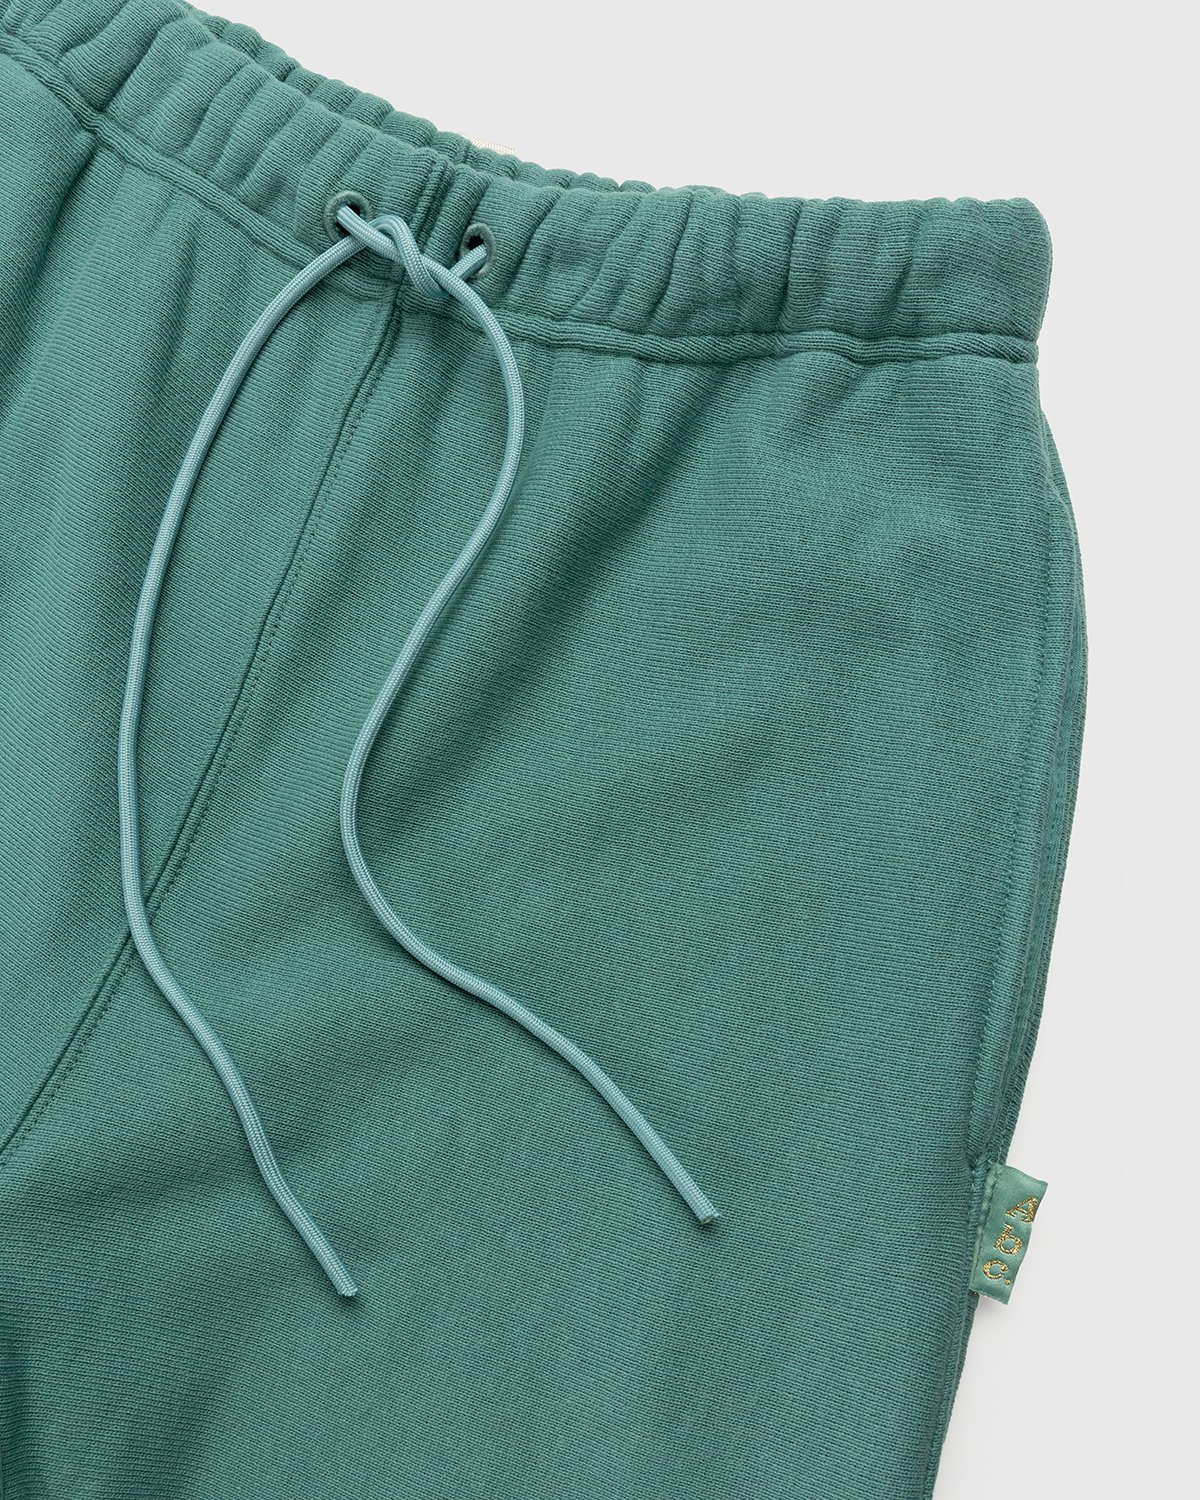 Abc. - French Terry Sweatpants Apatite - Clothing - Green - Image 5